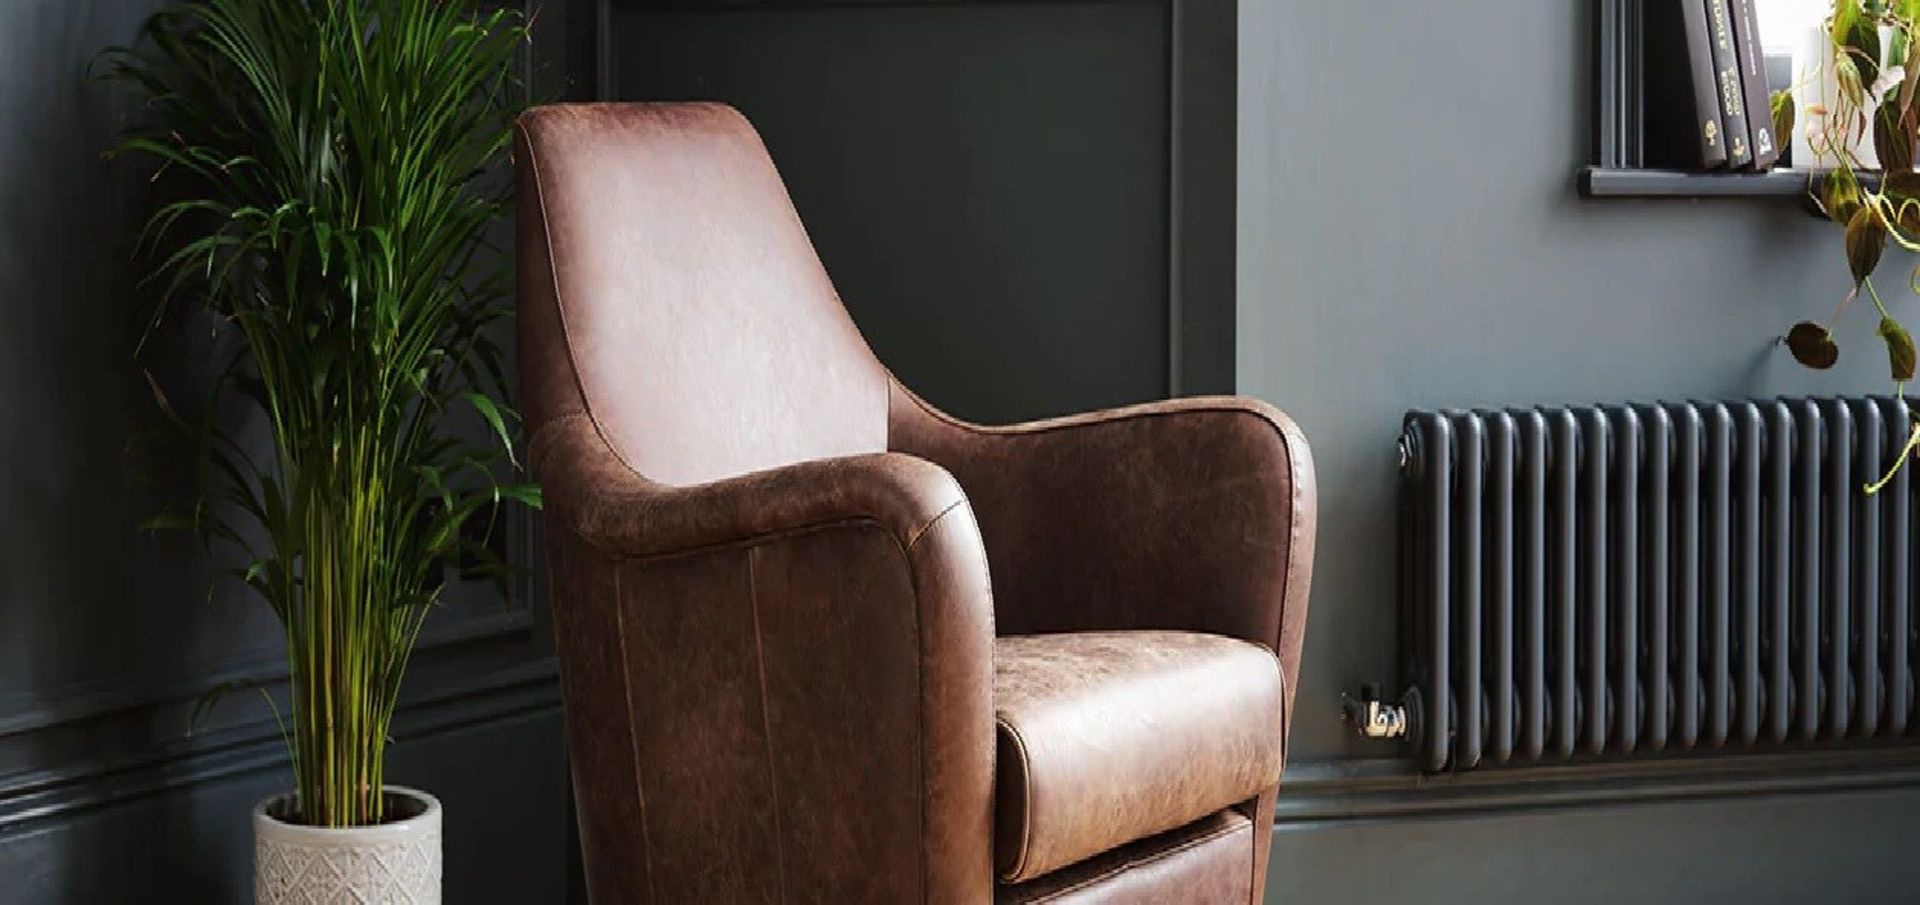 Laura Ashley Saltney Vintage Leather Chair Tobacco Brown Create striking and modern interiors